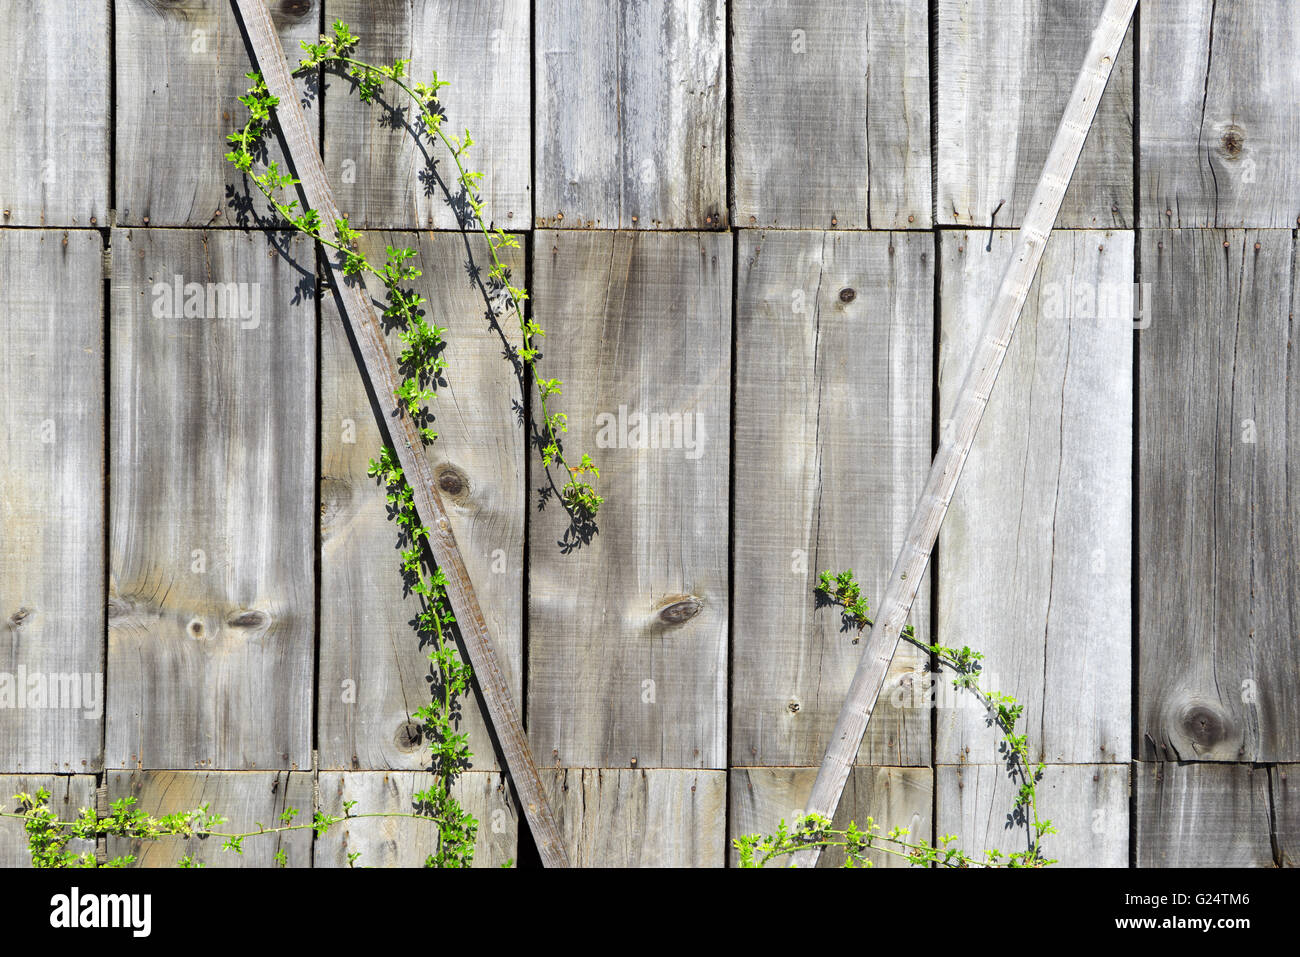 Creeping plant on a wooden wall Stock Photo